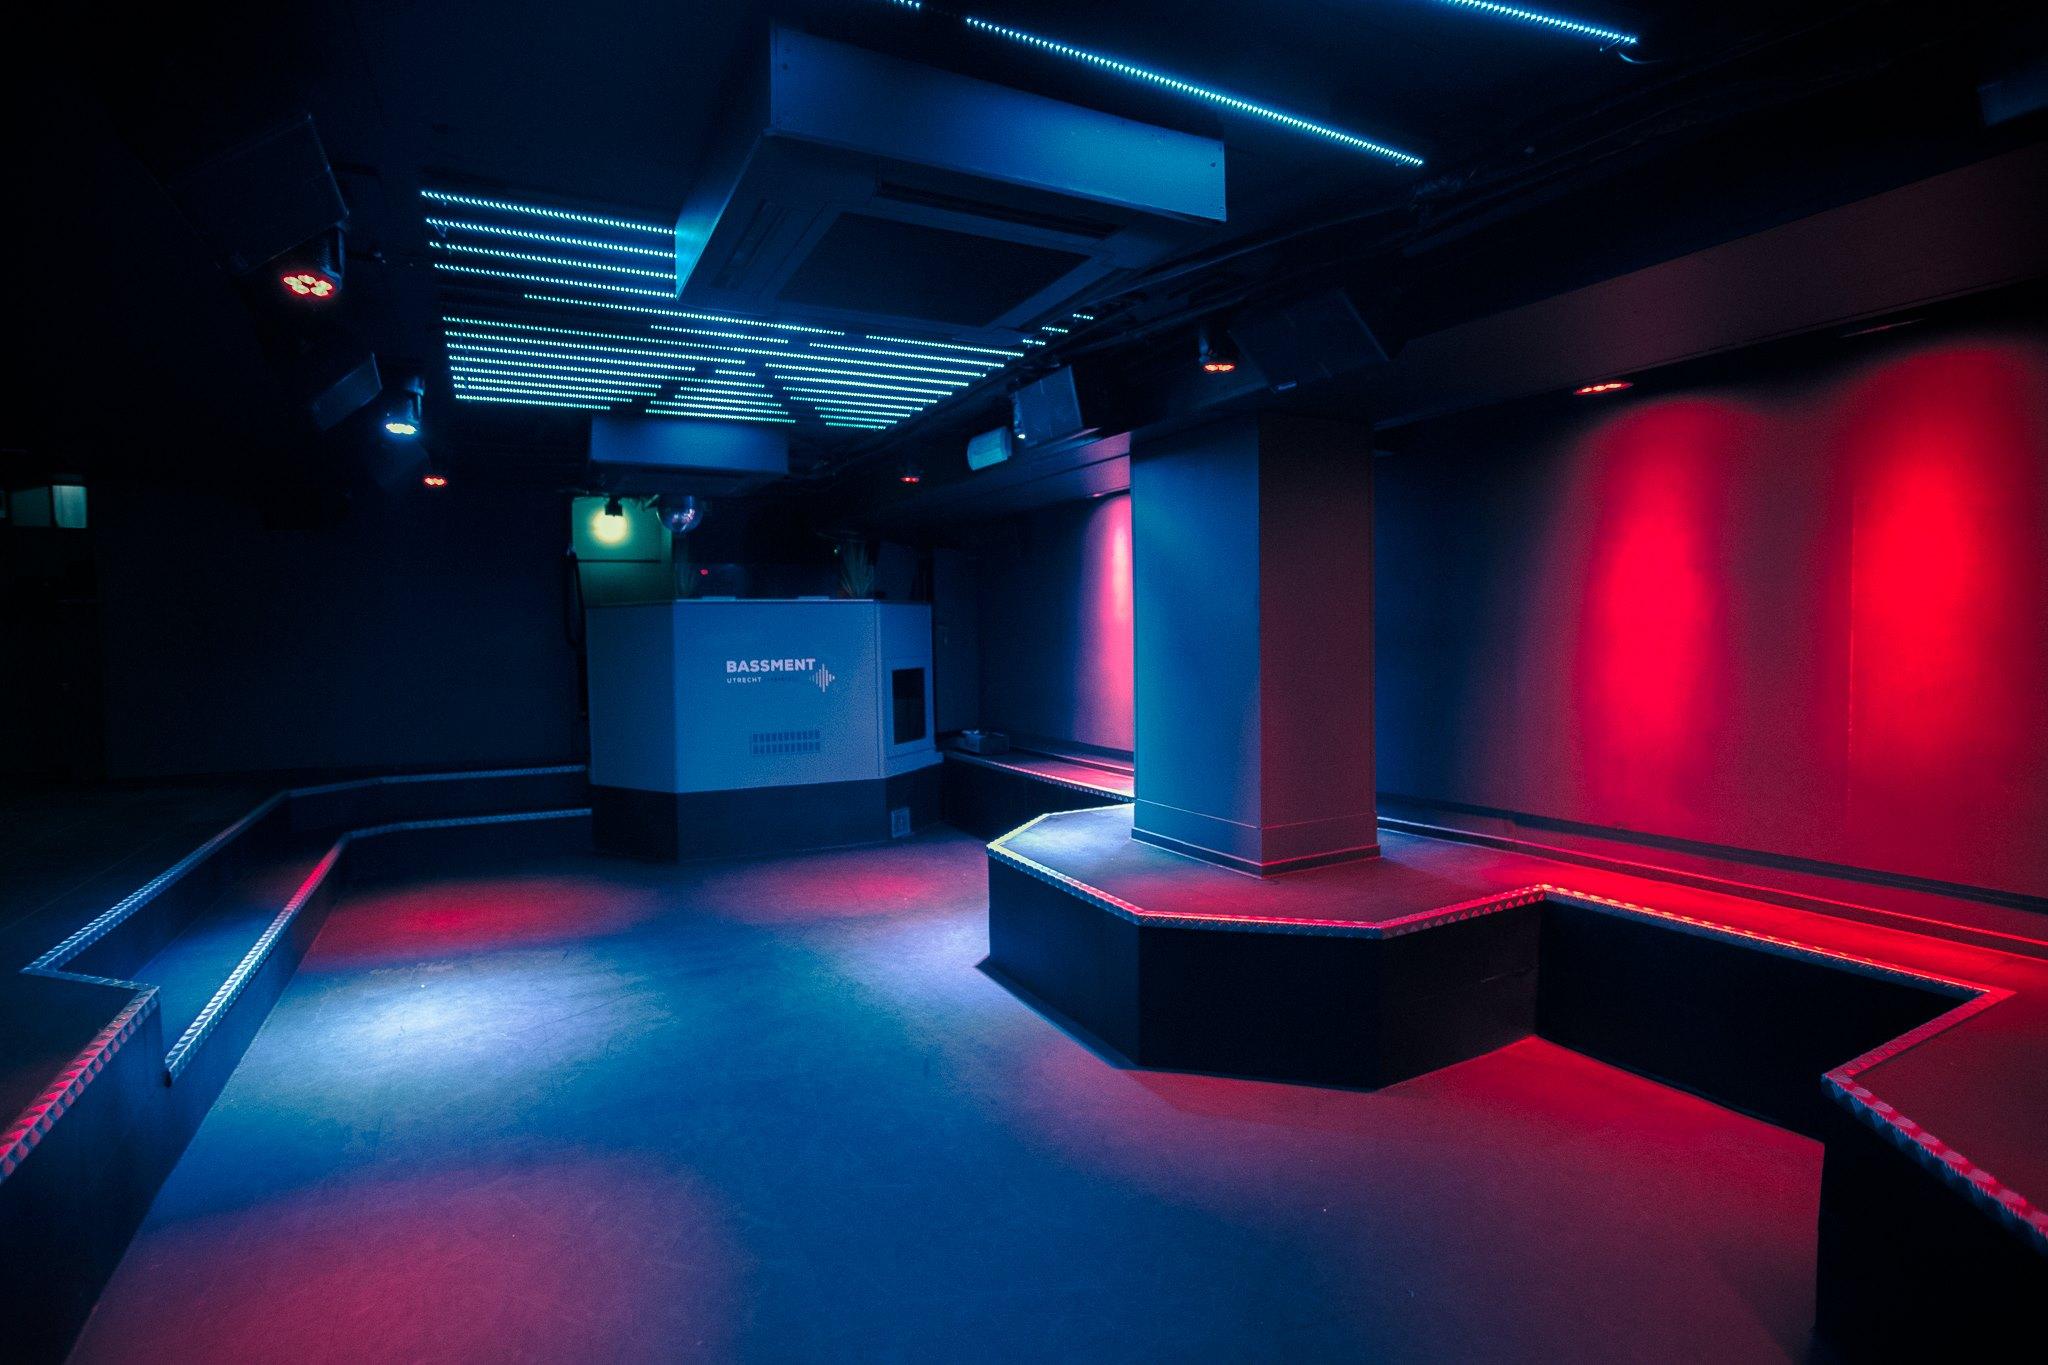 Cover image of this place Bassment Nightclub Utrecht 